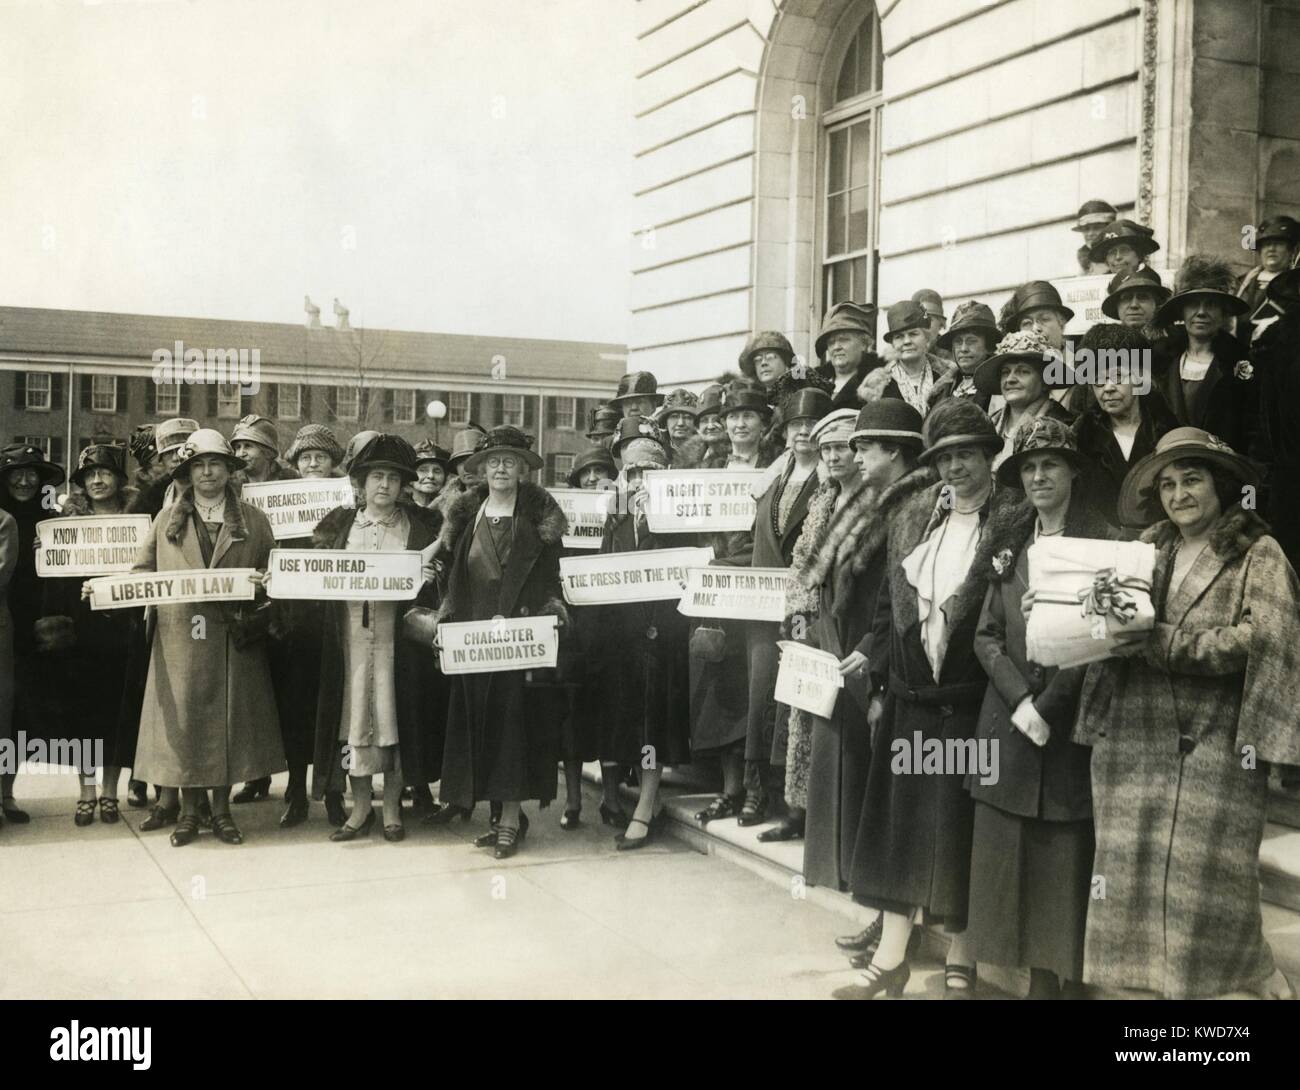 Women Suffragettes holding placards with political activist slogans in 1920. Signs read: Know Your Courts-Study Our Politicians; Liberty in Law; Law Makers Must Not Be Law Breakers; Character in Candidates; etc. (BSLOC 2015 16 190) Stock Photo